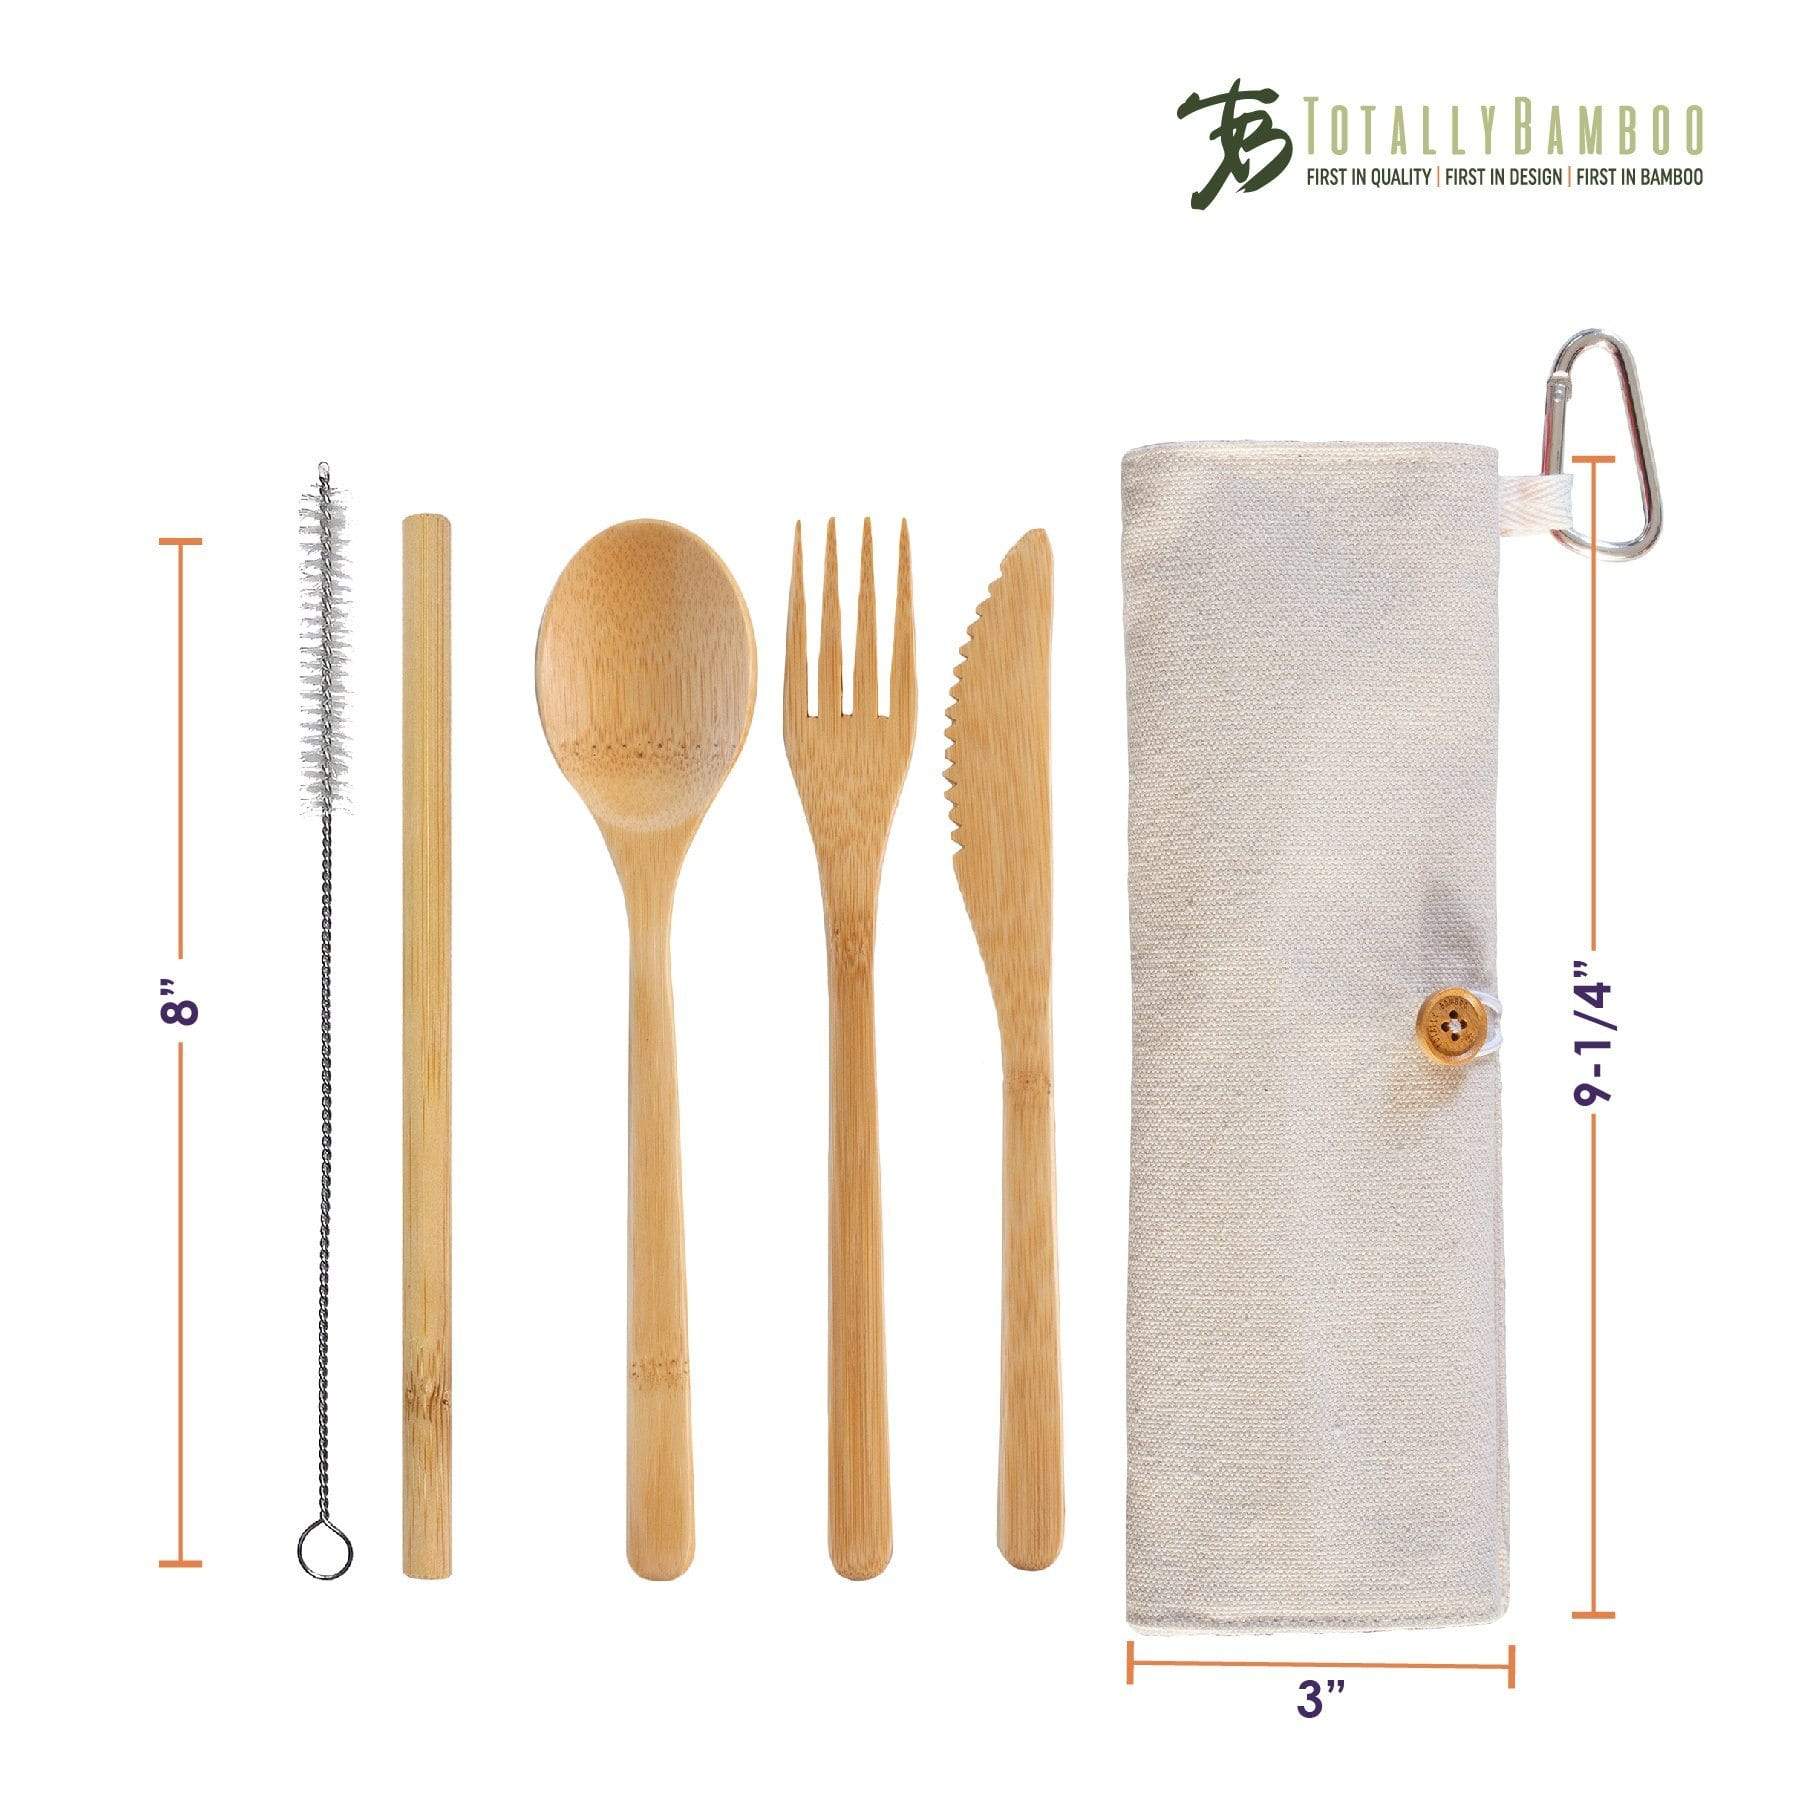 https://totallybamboo.com/cdn/shop/products/totally-bamboo-take-along-reusable-utensil-set-with-travel-case-includes-bamboo-spoon-fork-knife-and-drinking-straw-dishwasher-safe-totally-bamboo-922249.jpg?v=1628000183